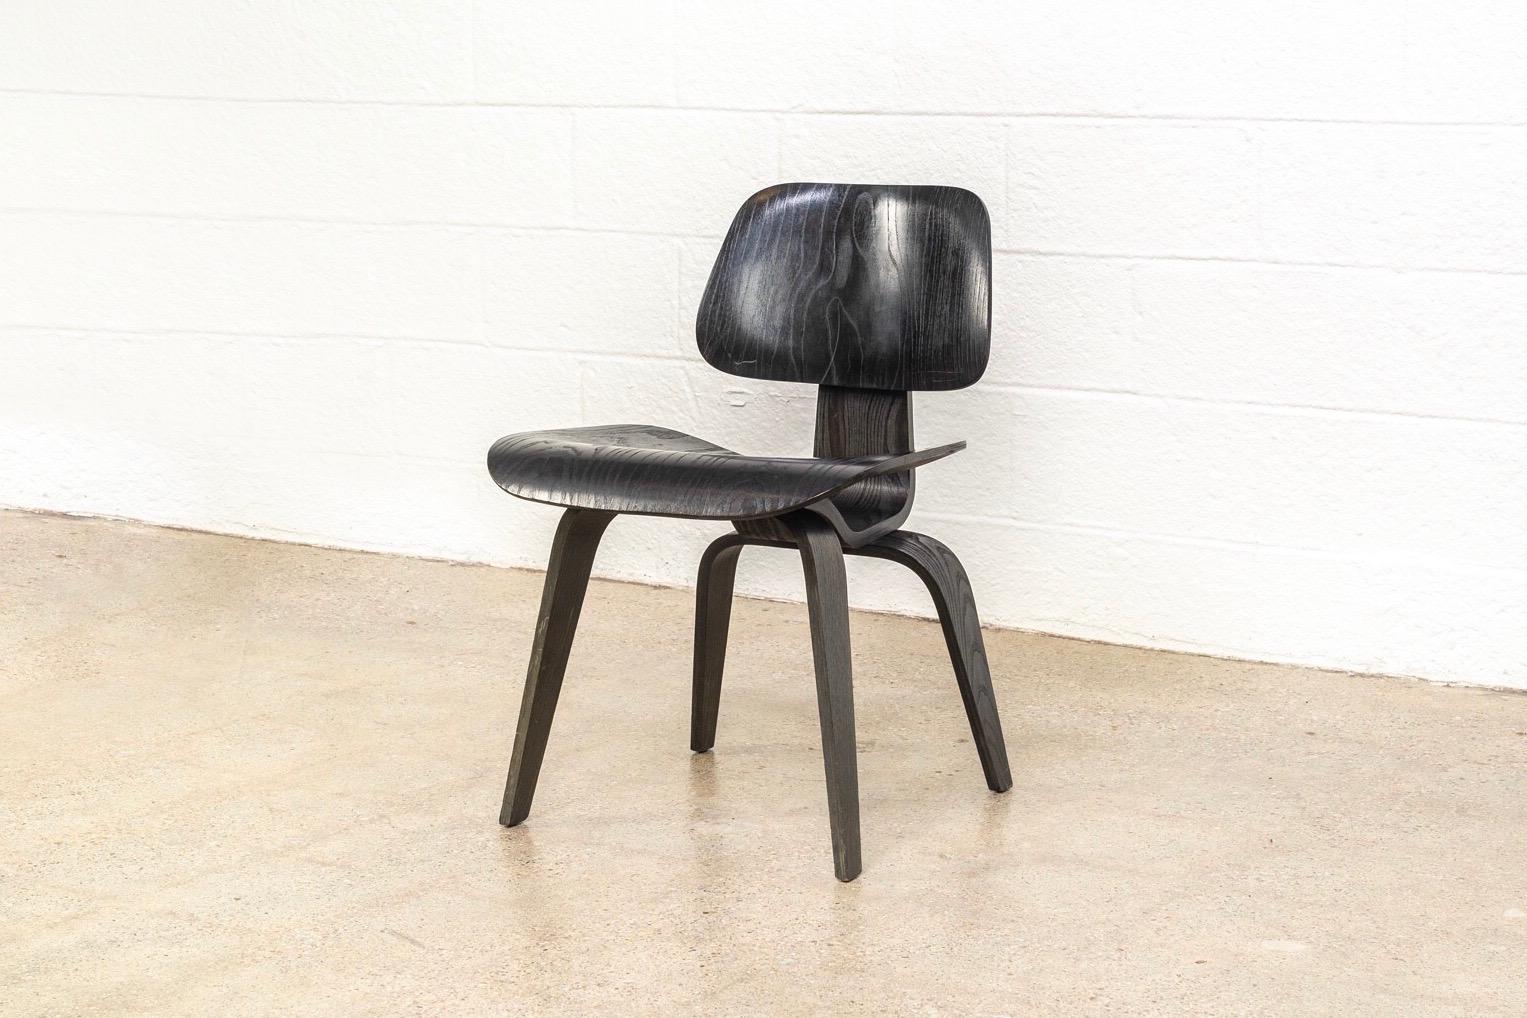 This original vintage Charles and Ray Eames for Herman Miller DCW dining chair is expertly crafted from ash molded plywood with black aniline finish. Designed in the 1940s and named Time magazine’s “Best Design of the 20th Century”, the iconic DCW